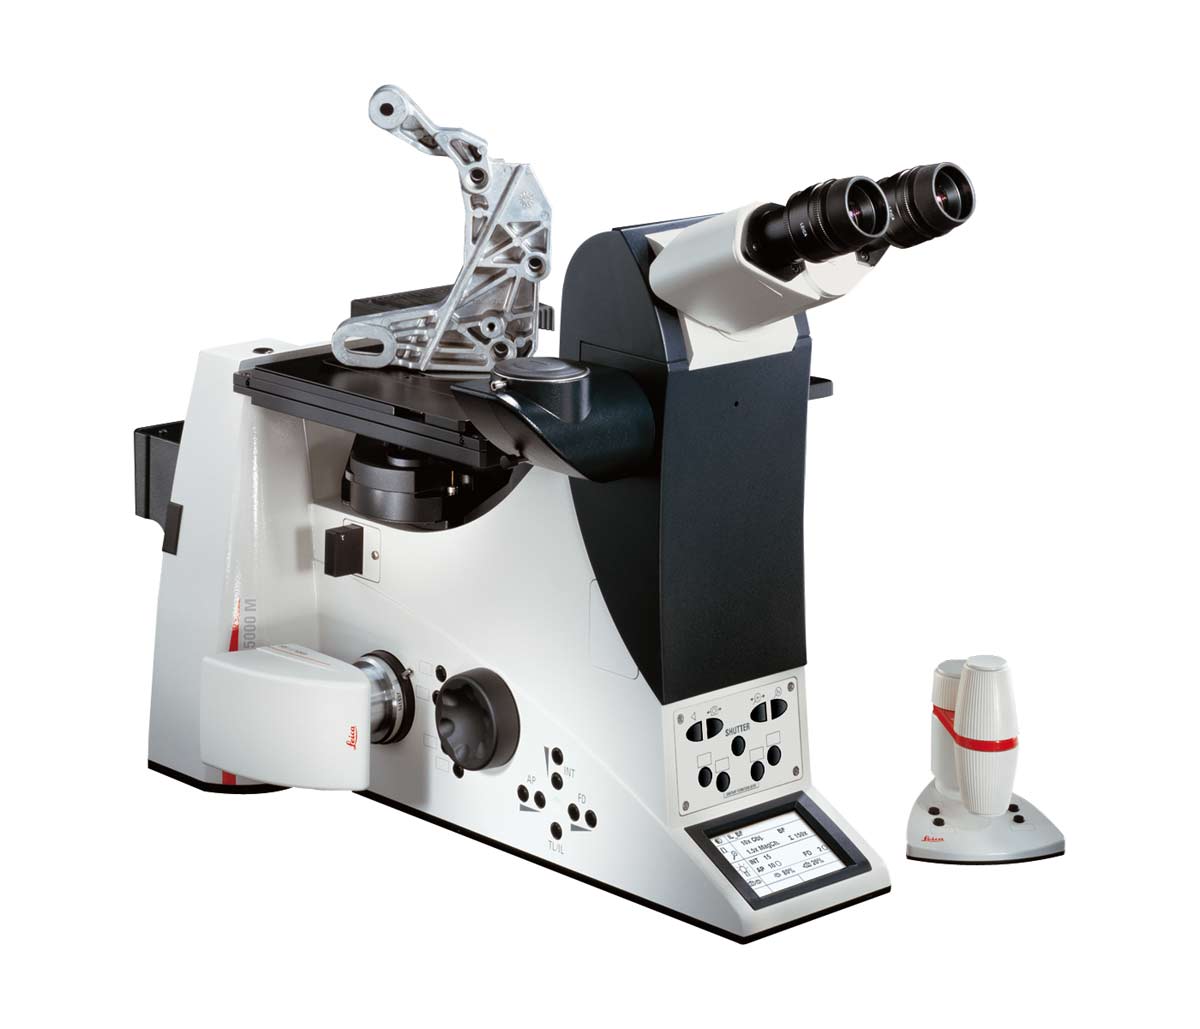 The complete Leica DMI5000 system, including microscope, camera, and software, provides a seamless, harmonious solution for materials testing and quality control.